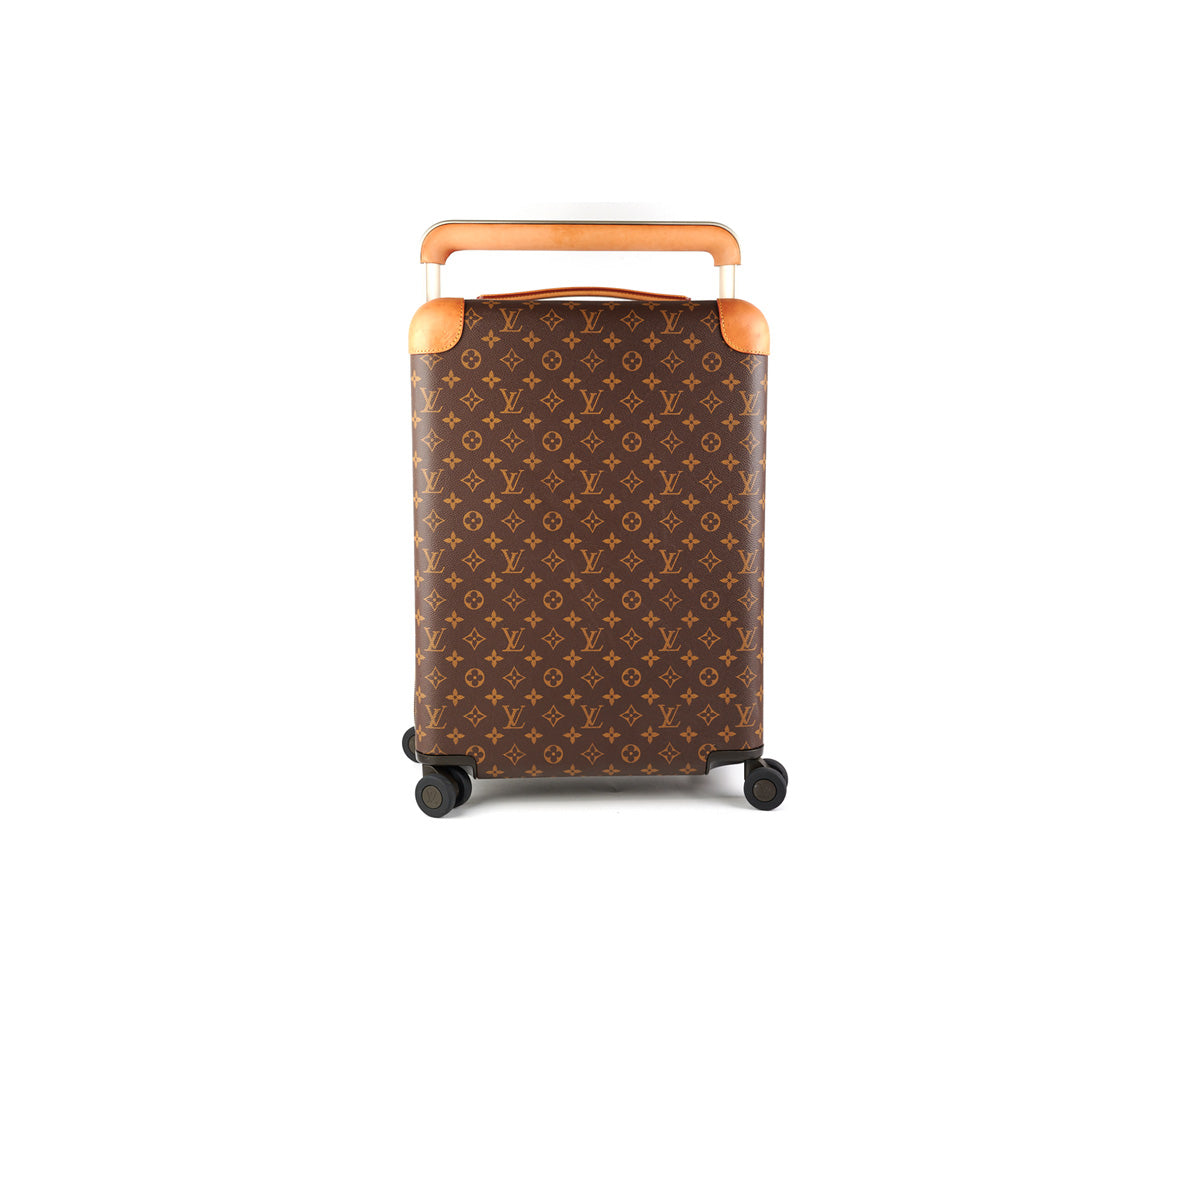 ✈ PACK WITH ME, LOUIS VUITTON HORIZON 50